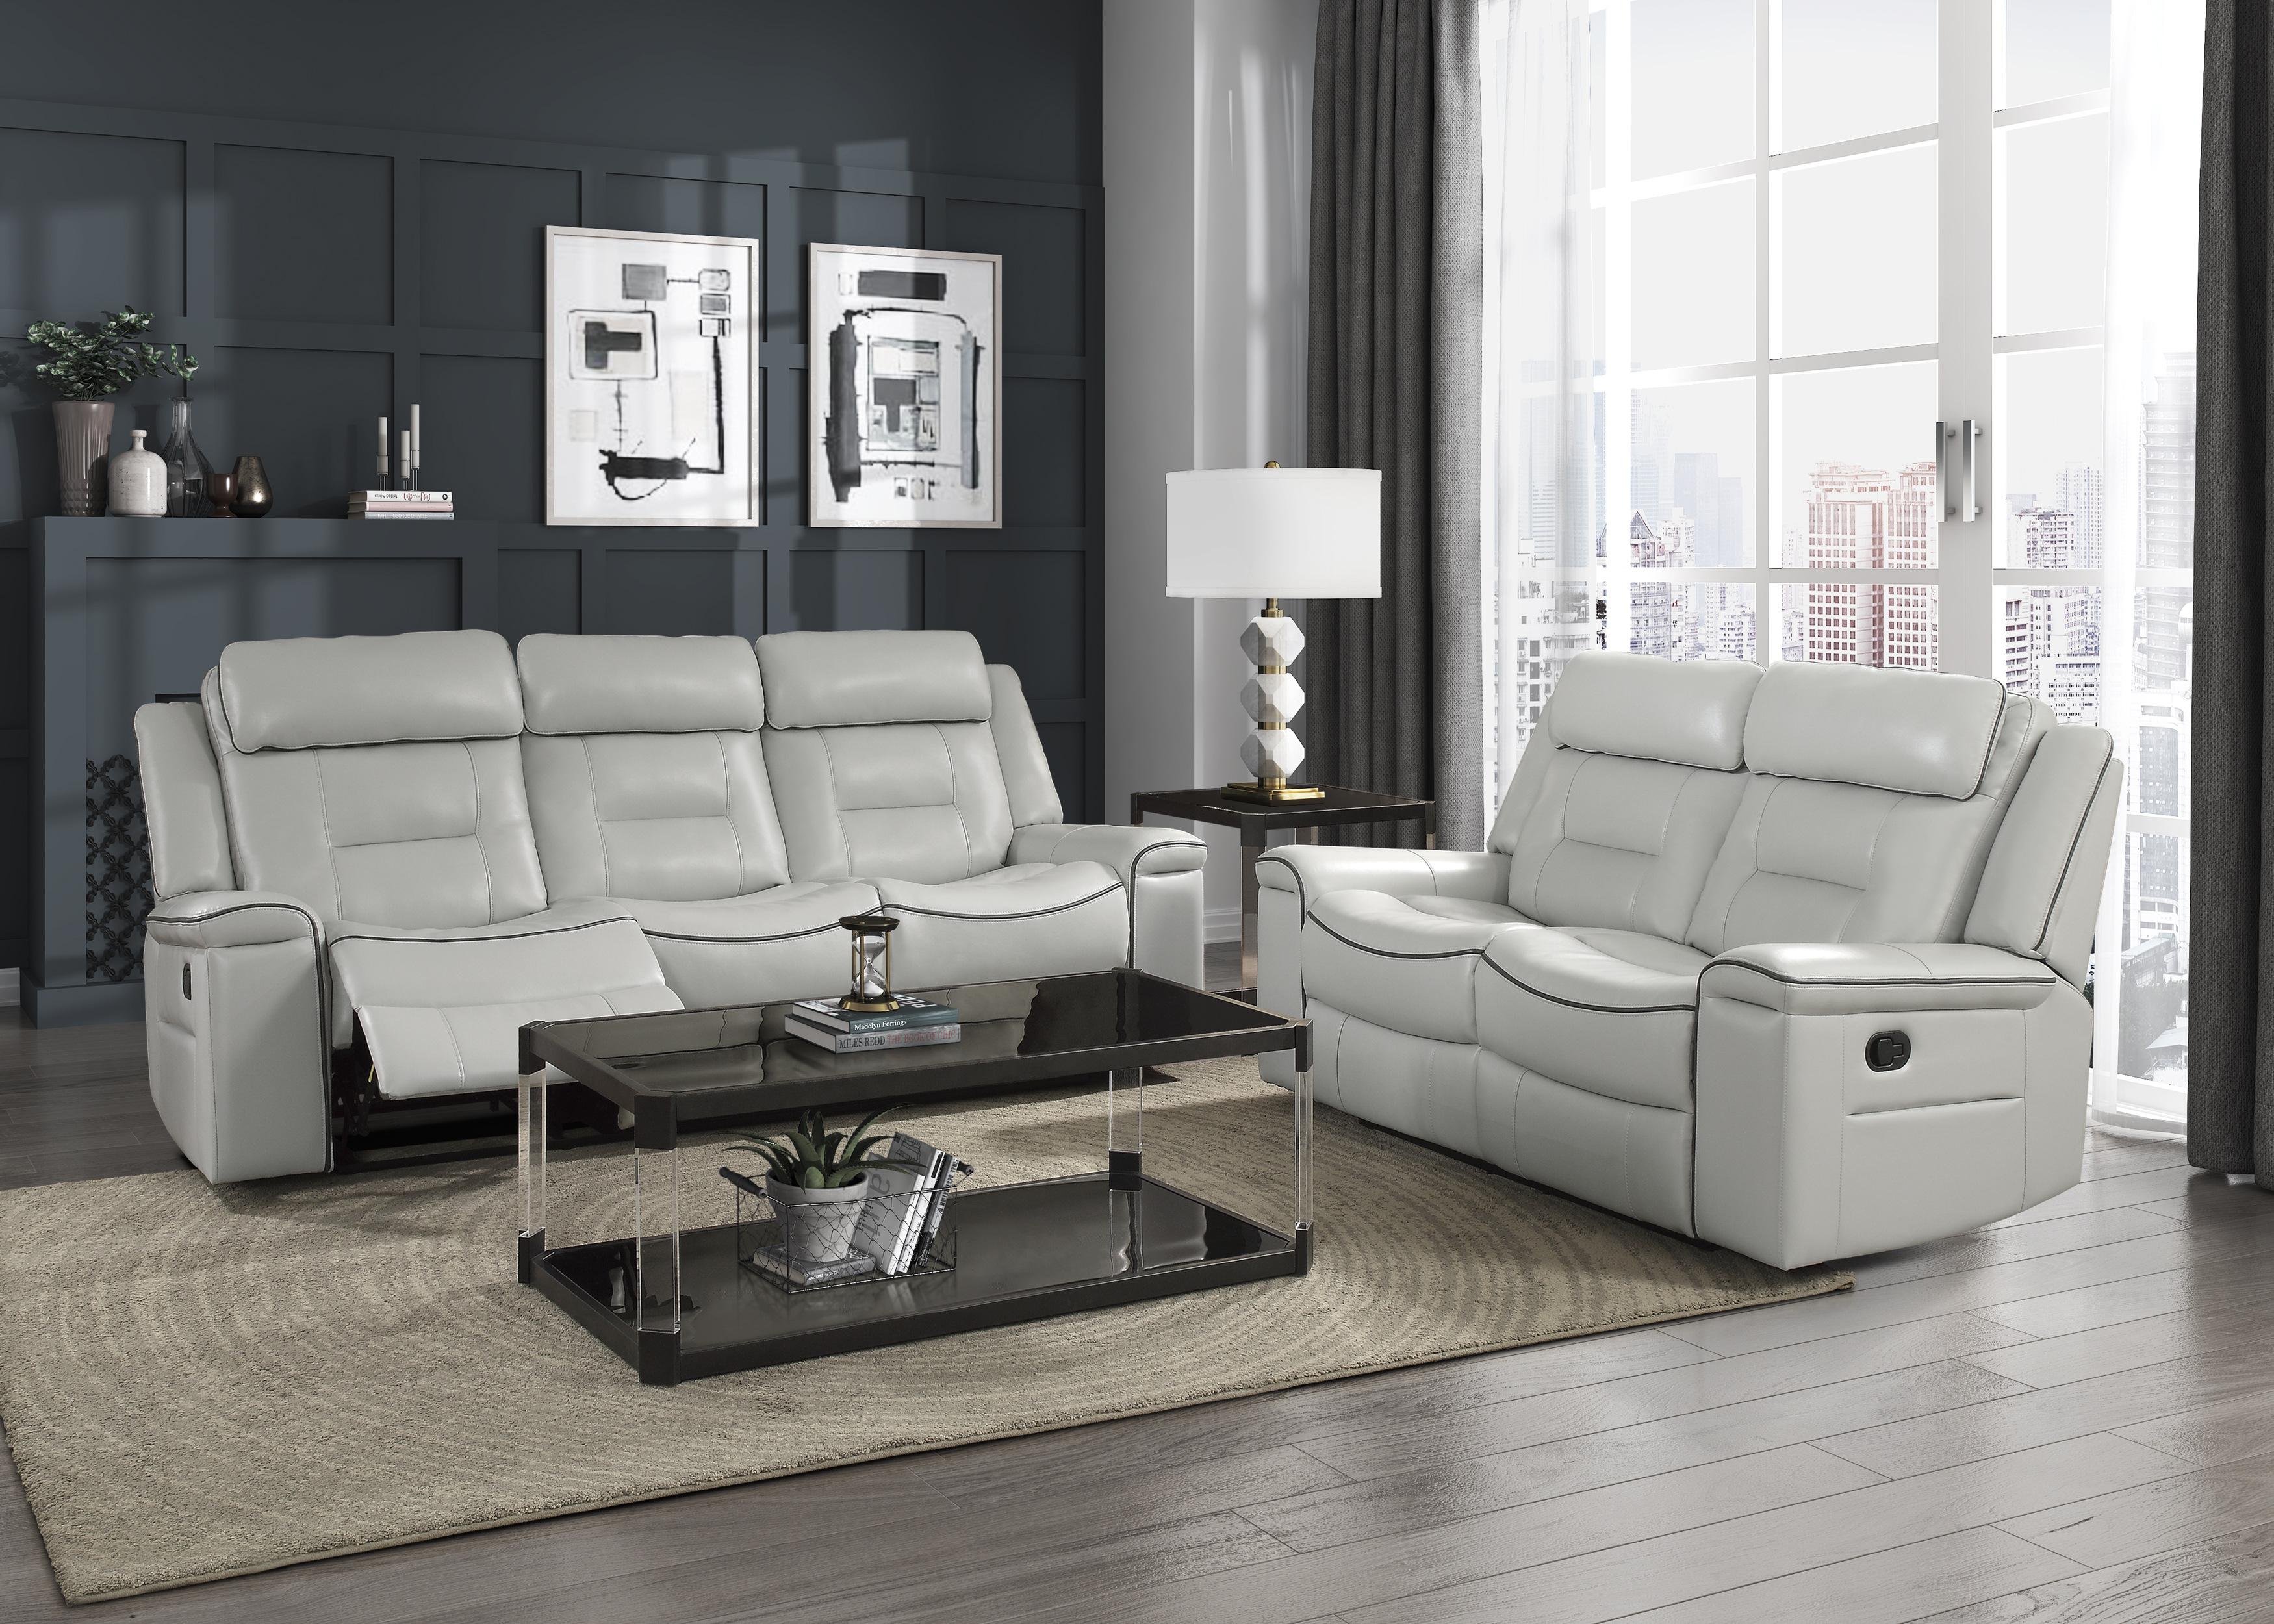 Contemporary Reclining Sofa Set 9999GY-2PC Darwan 9999GY-2PC in Light Gray Faux Leather